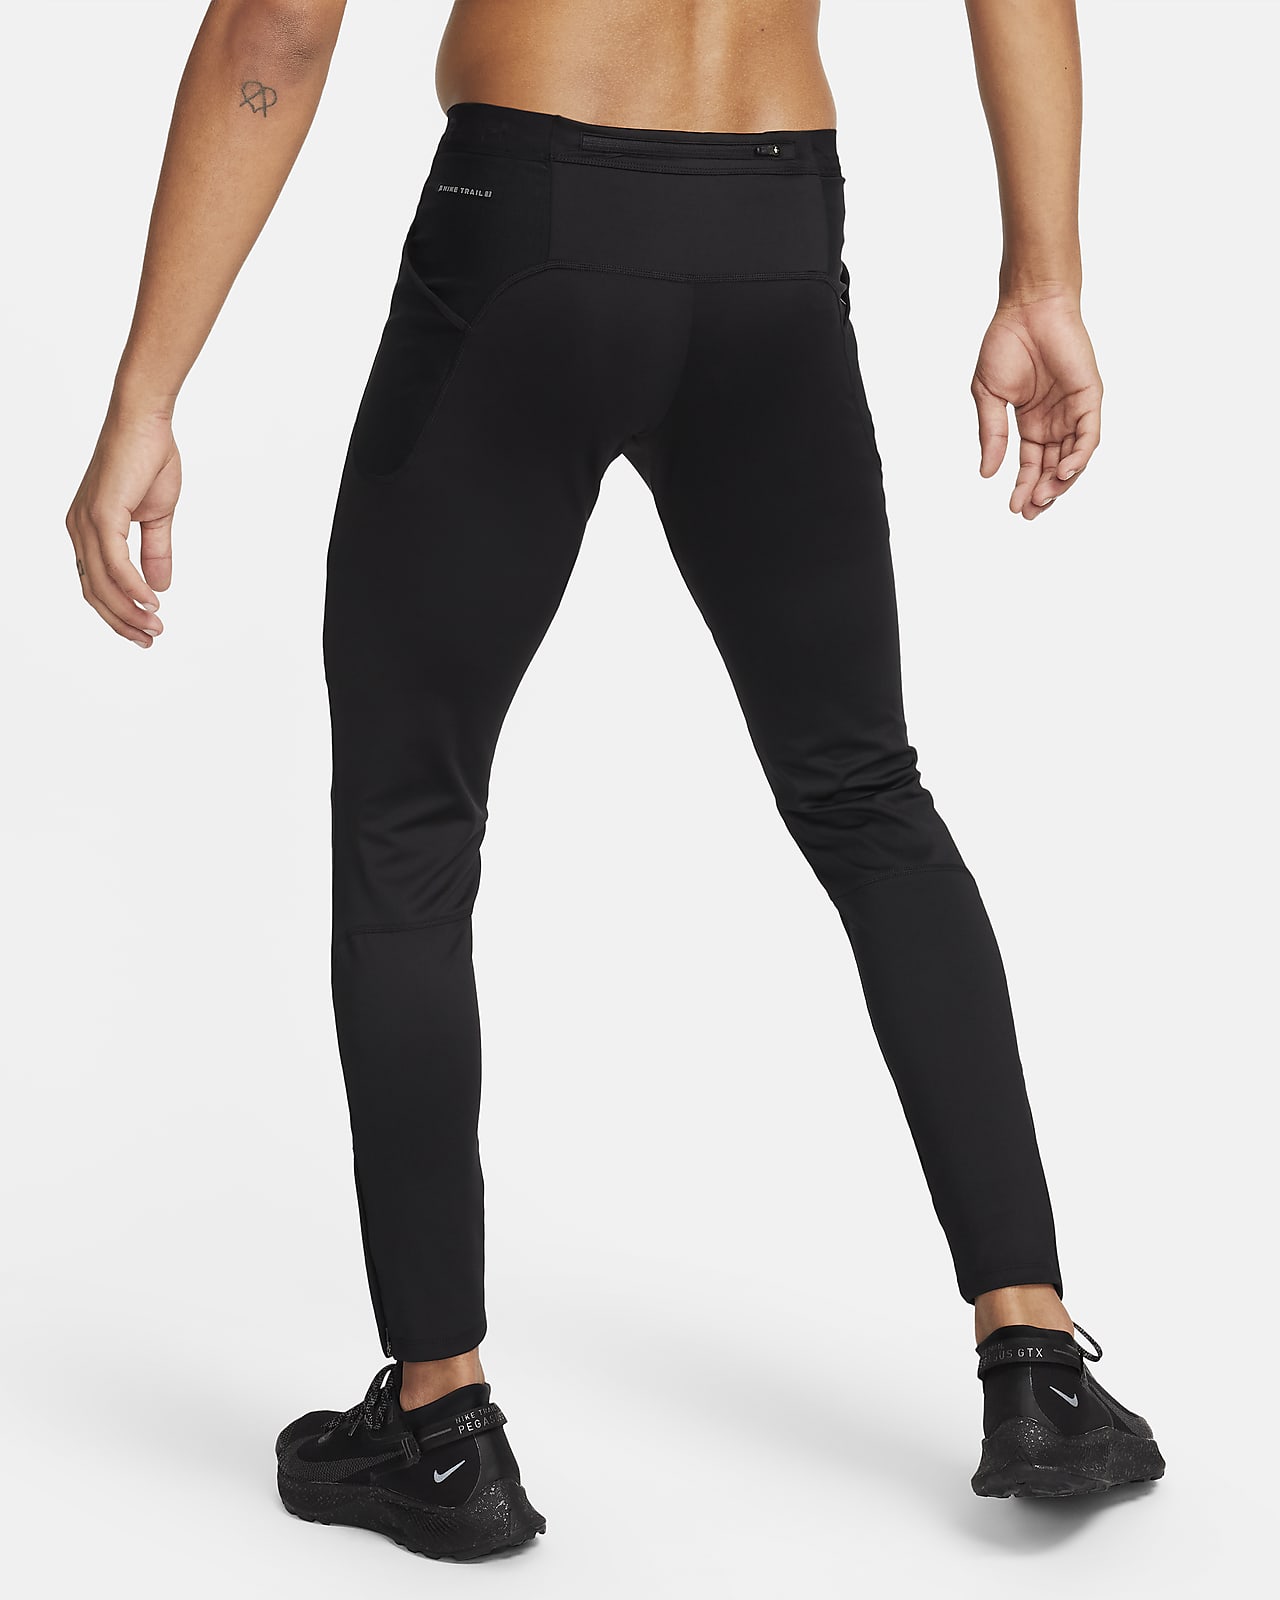 New Year Sale: All Items Track & Field Tights & Leggings. Nike.com